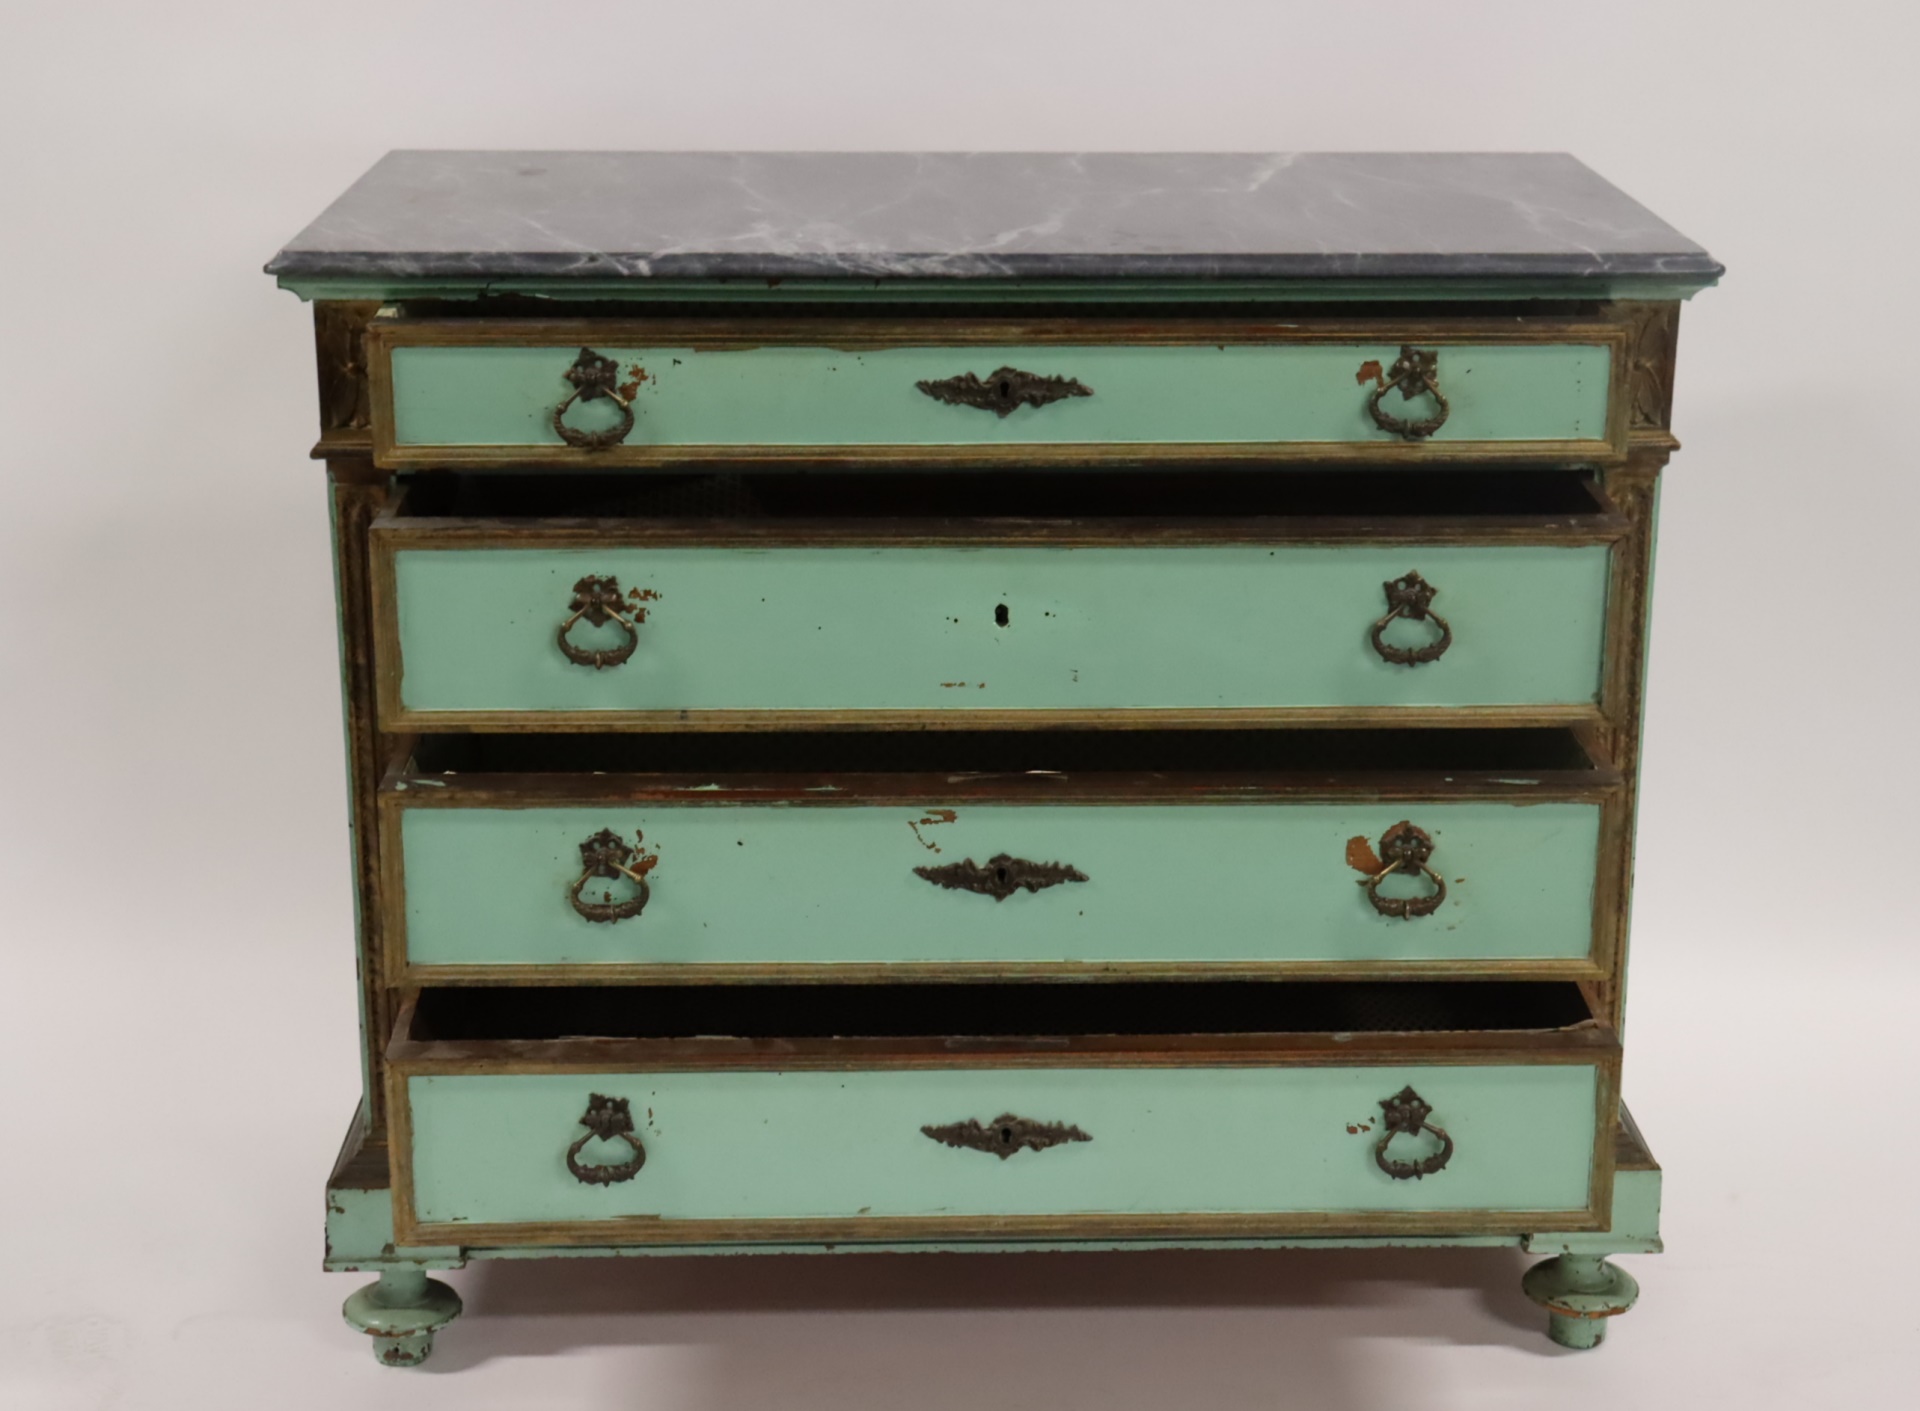 ANTIQUE CONTINENTAL, PAINTED MARBLETOP